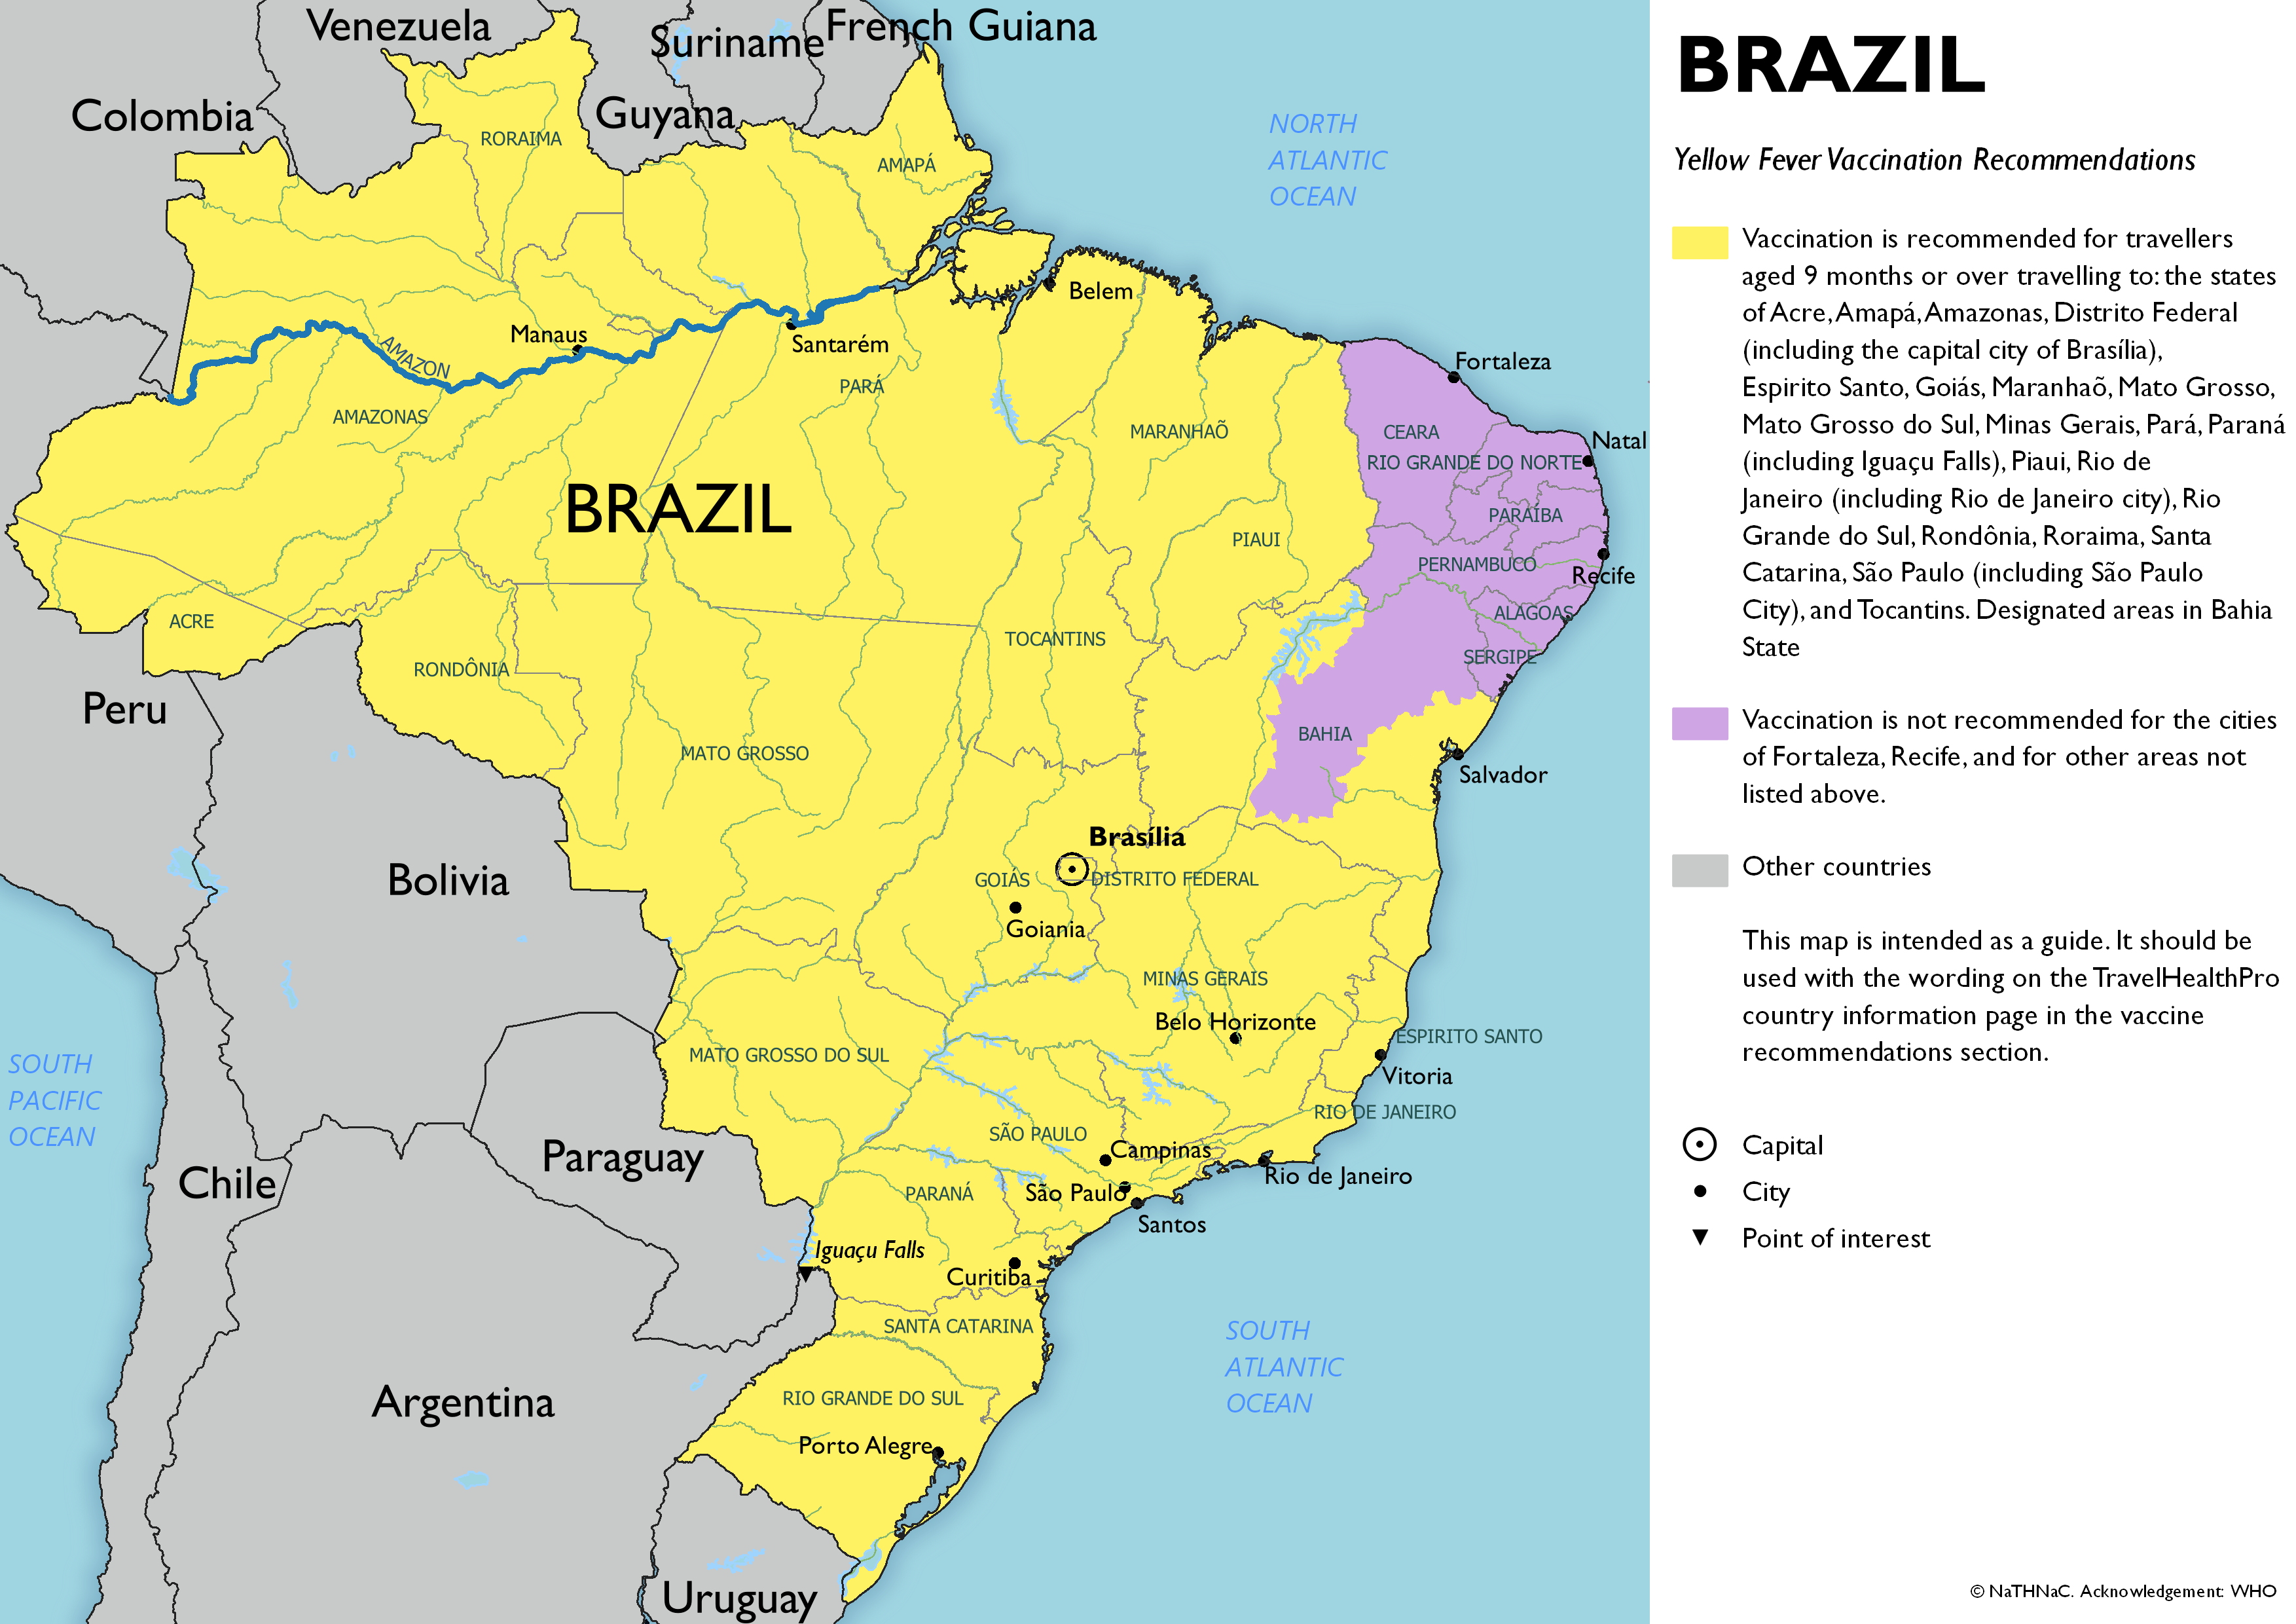 Yellow fever vaccine recommendation map for Brazil